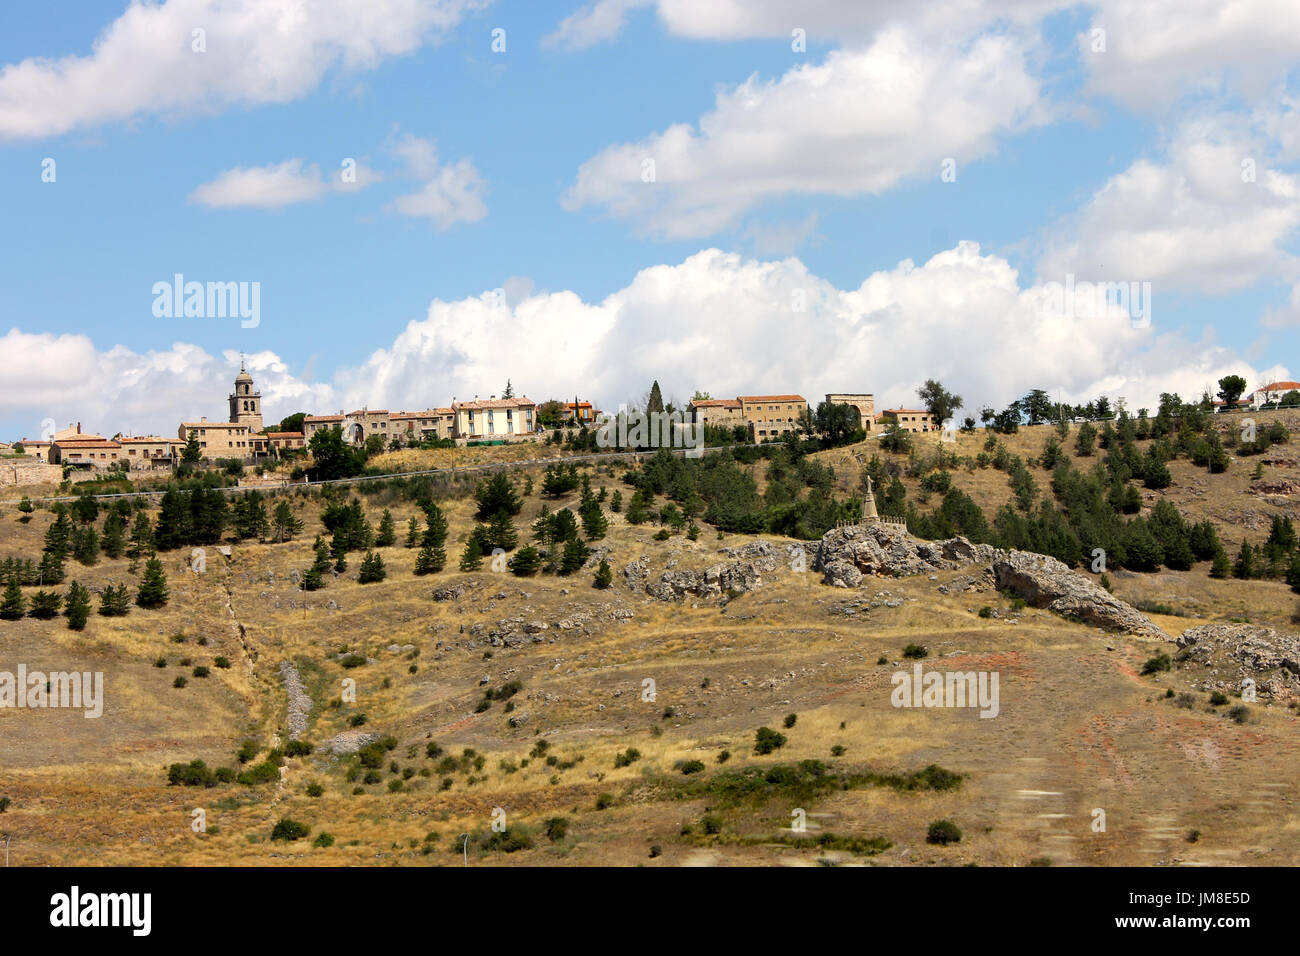 Views of the town of Medinaceli from the road leading to Soria, Spain Stock Photo